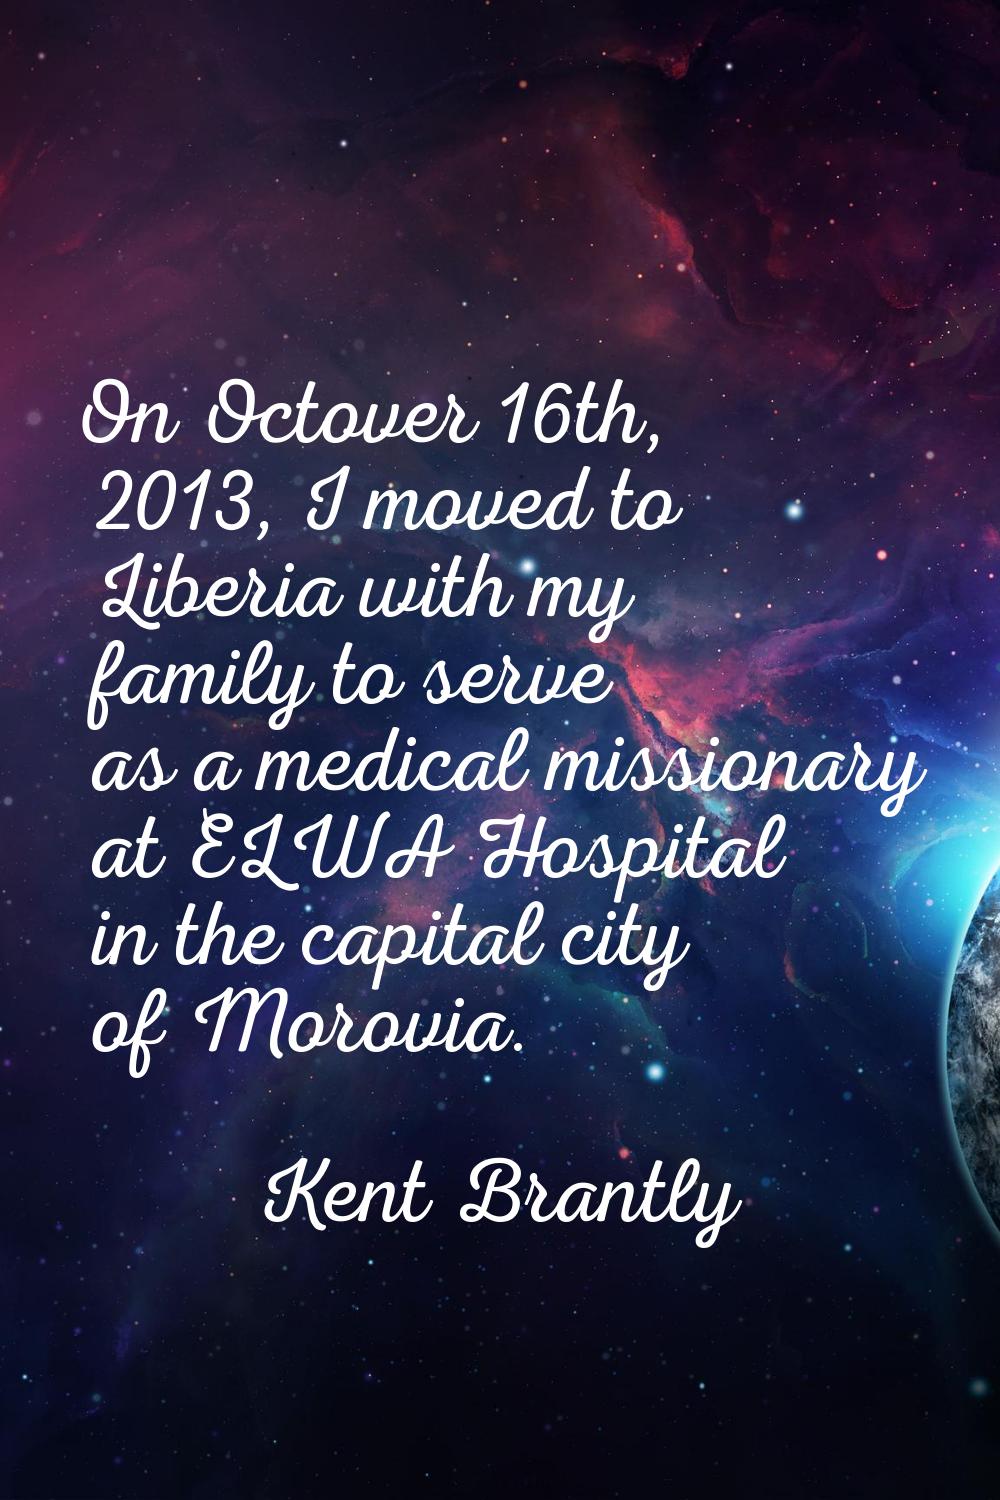 On Octover 16th, 2013, I moved to Liberia with my family to serve as a medical missionary at ELWA H